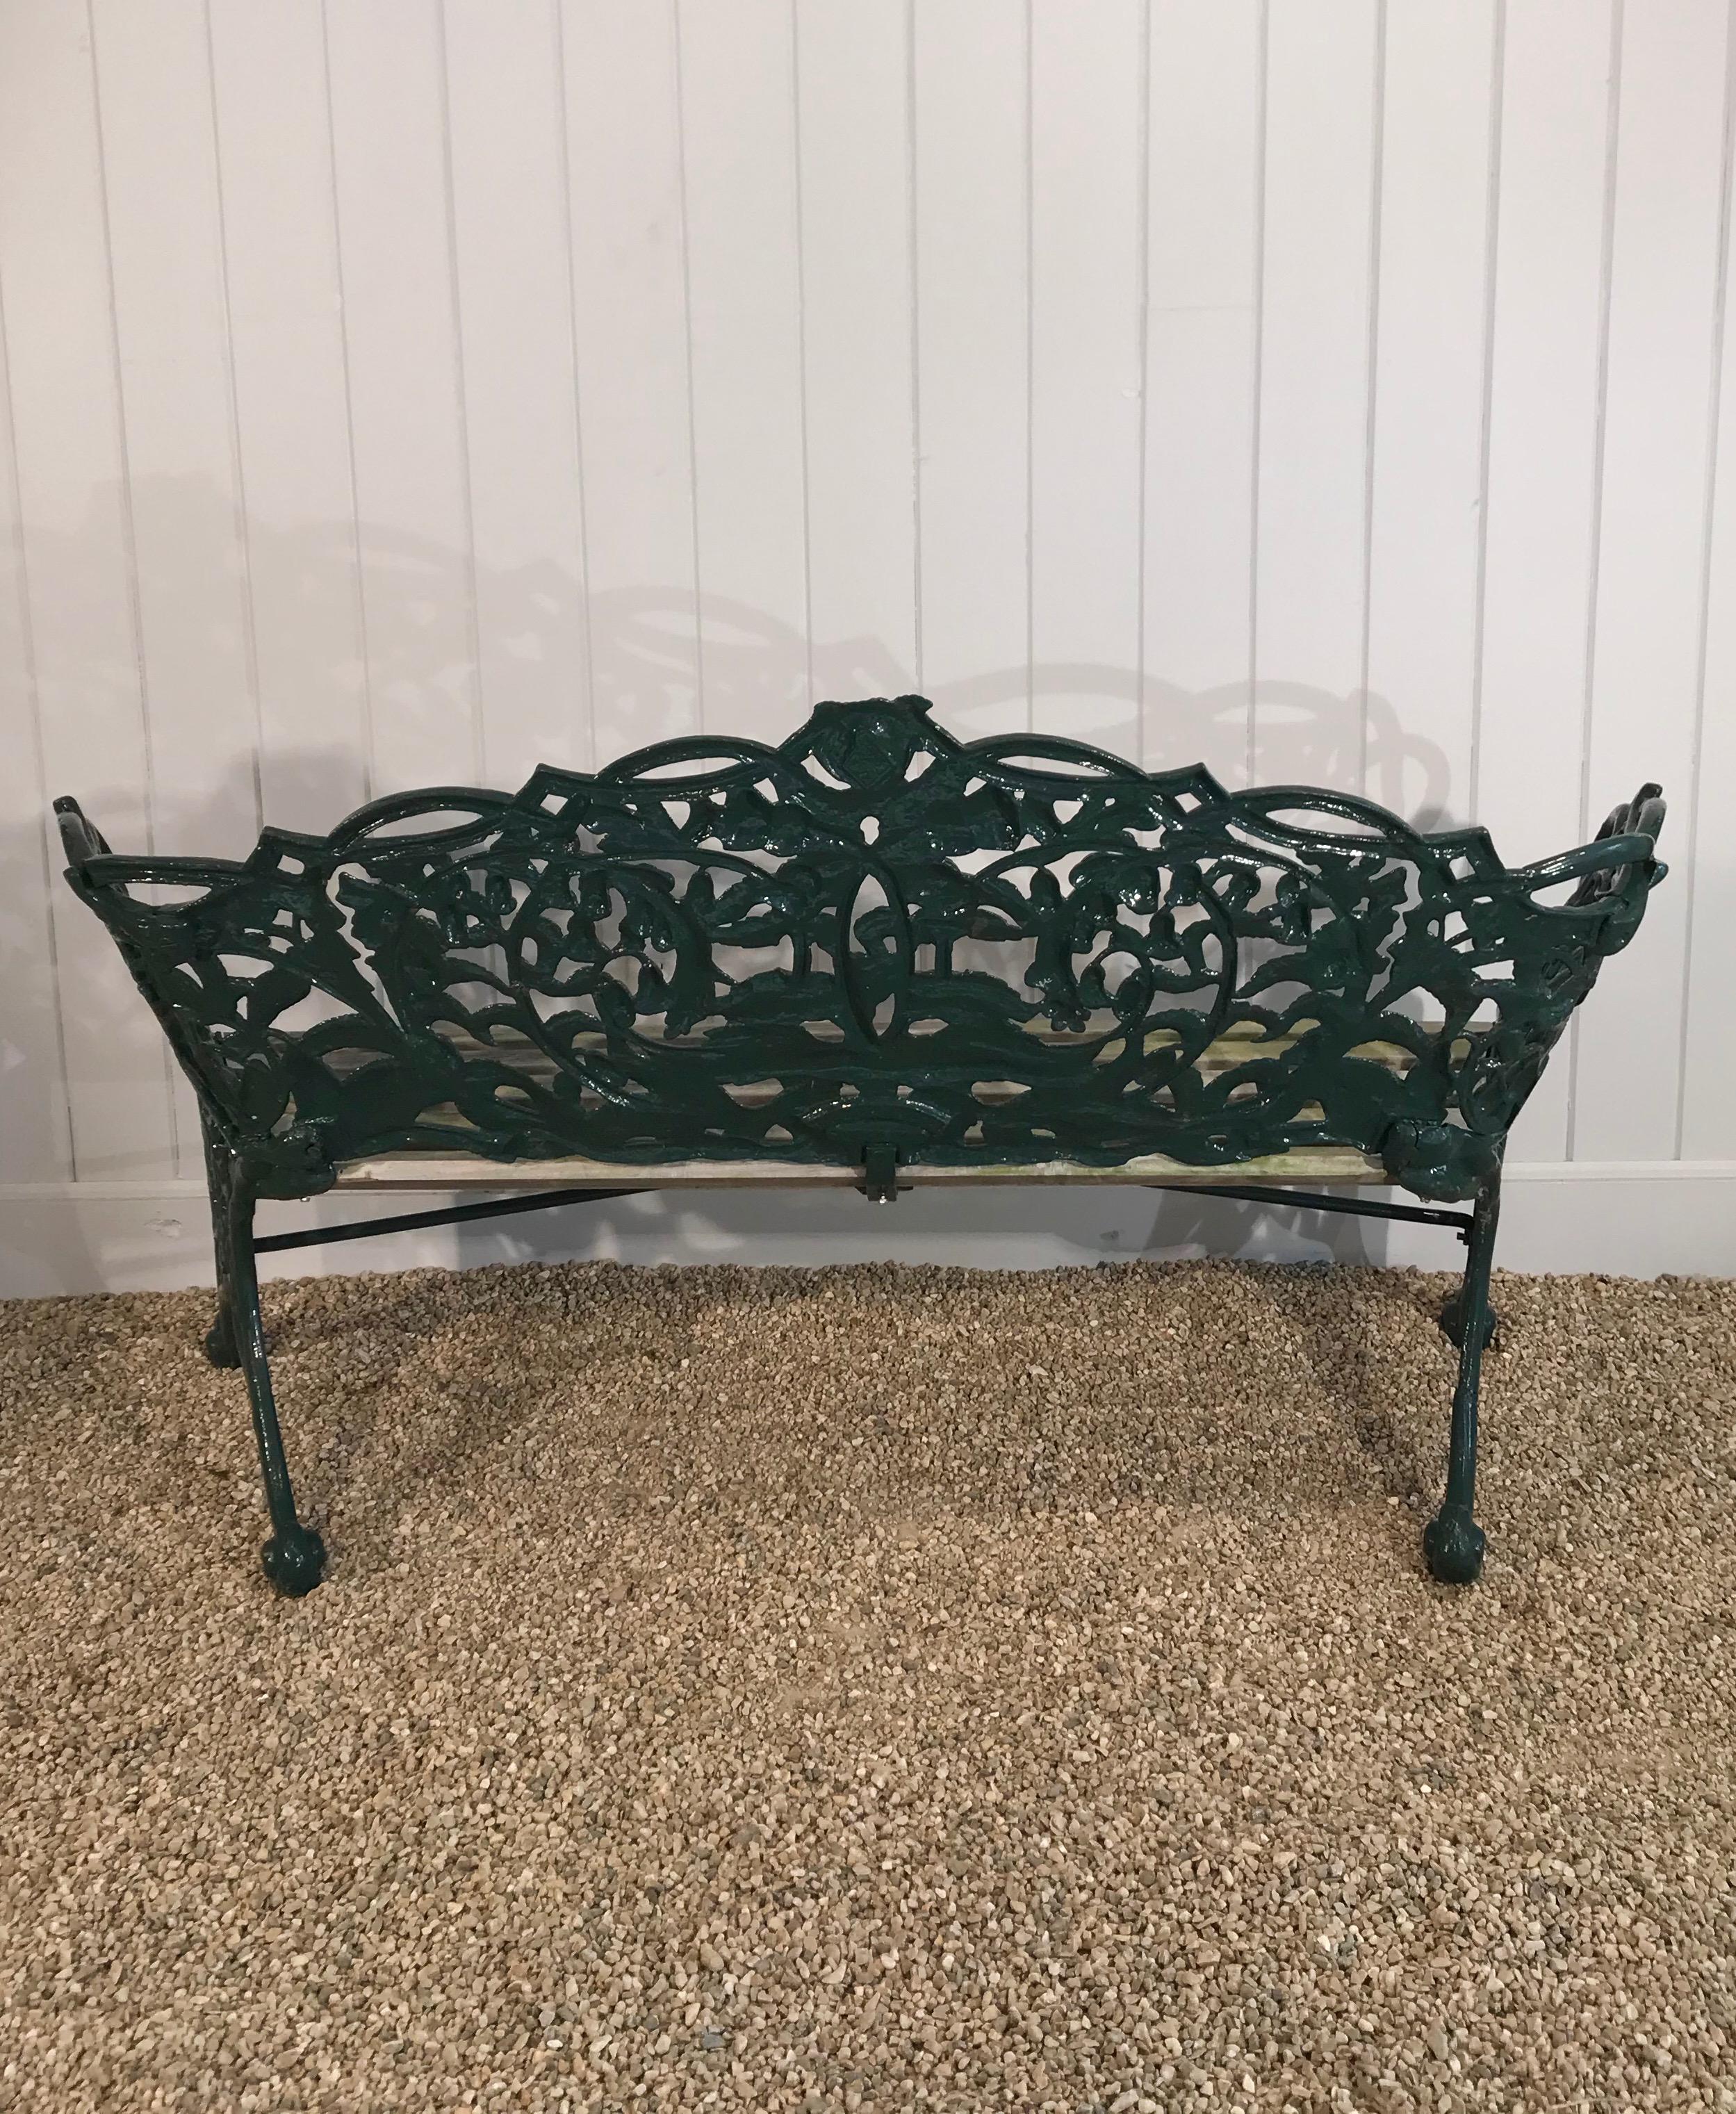 Oak Rose and Thistle Cast Iron Bench by T. Perry and Sons, Glasgow, 1858 For Sale